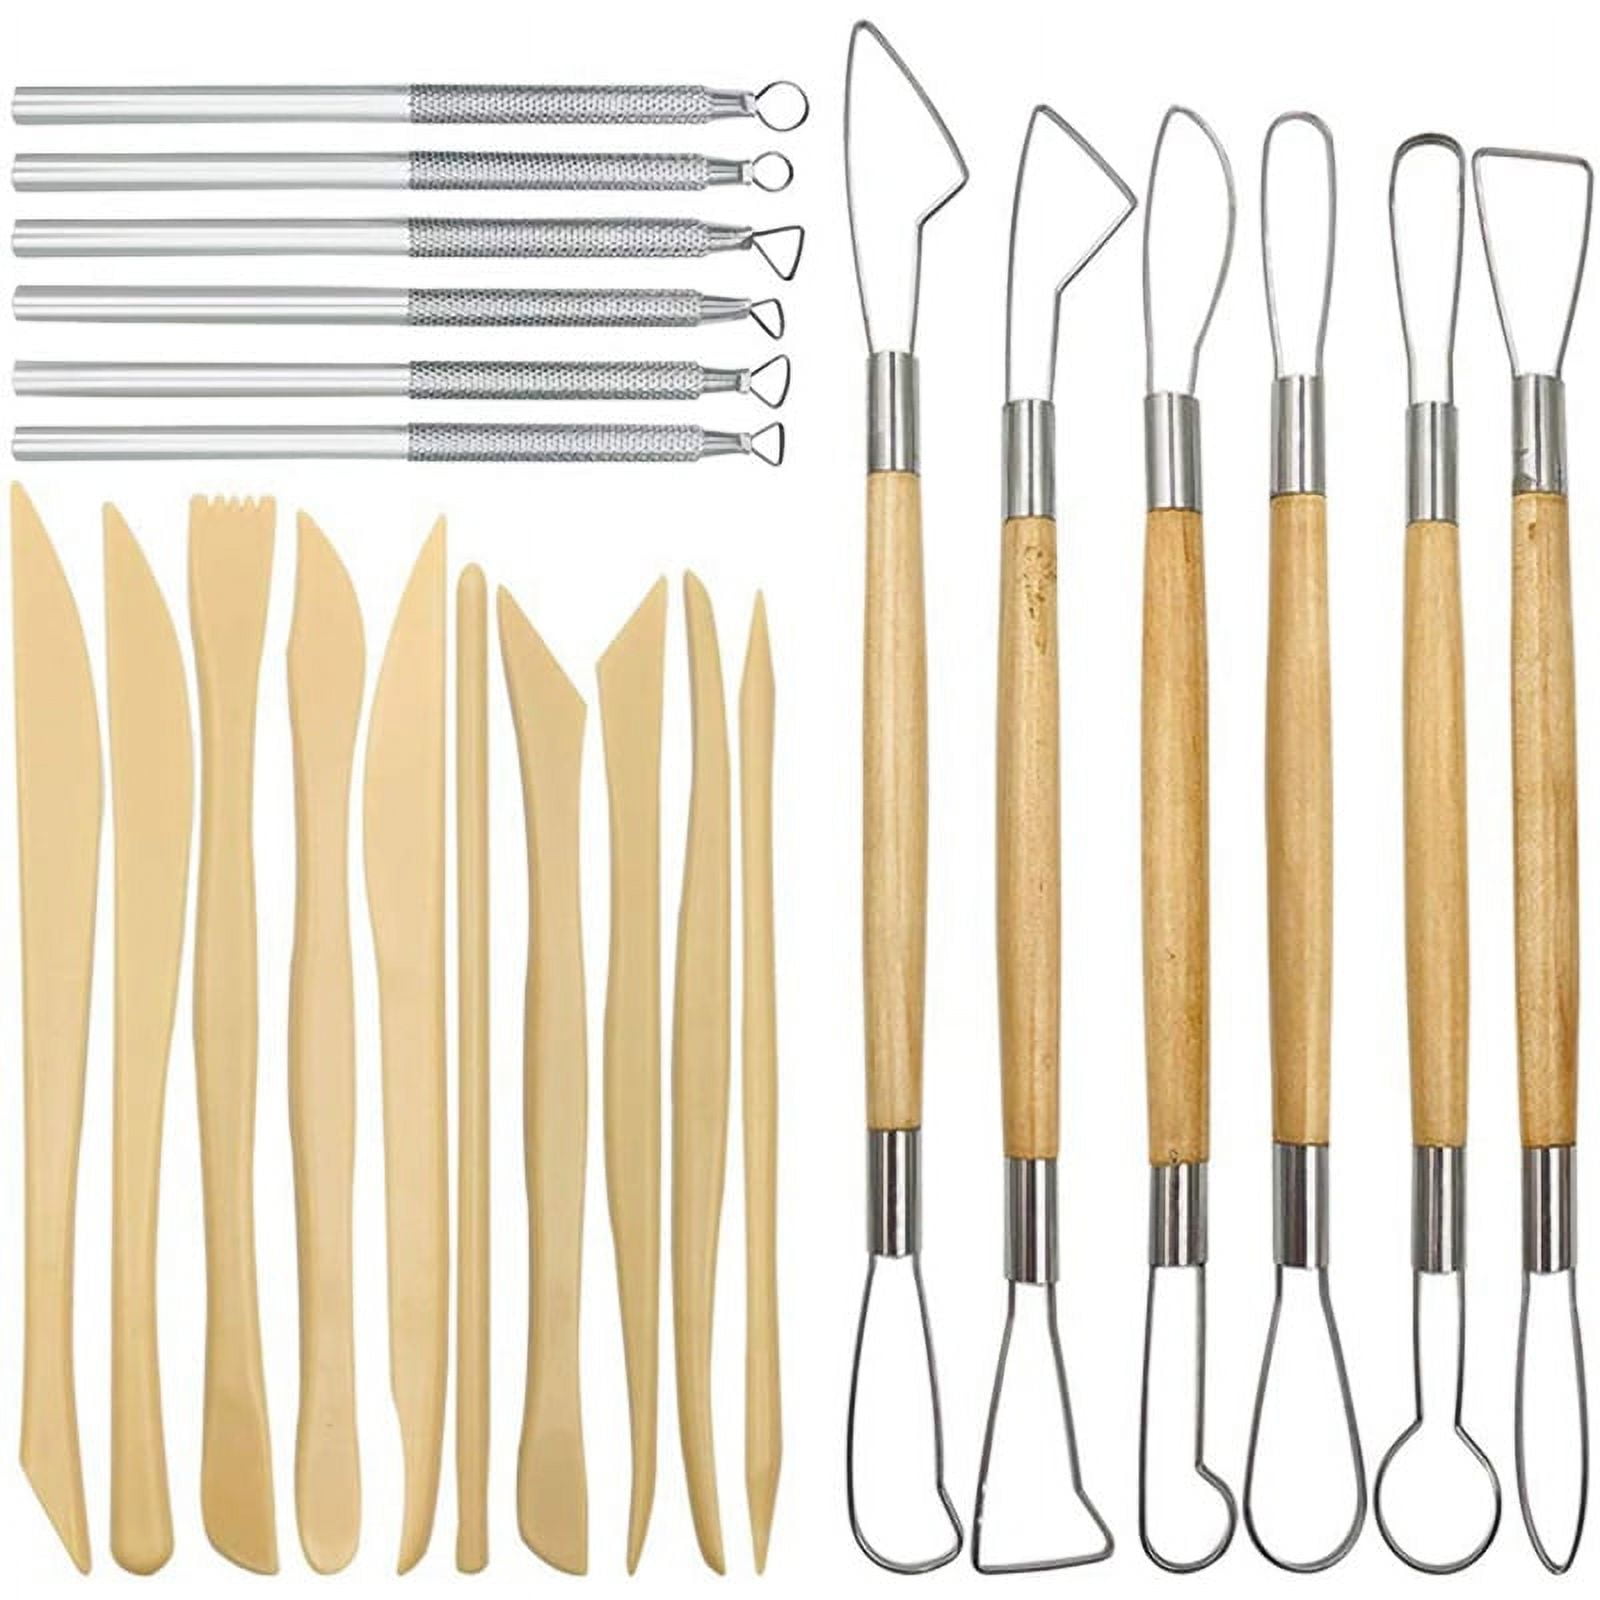 Pottery Clay Sculpting , 22Pcs Wooden Handle Pottery Carving & Metal  Scraper & Plastic Clay Shaping